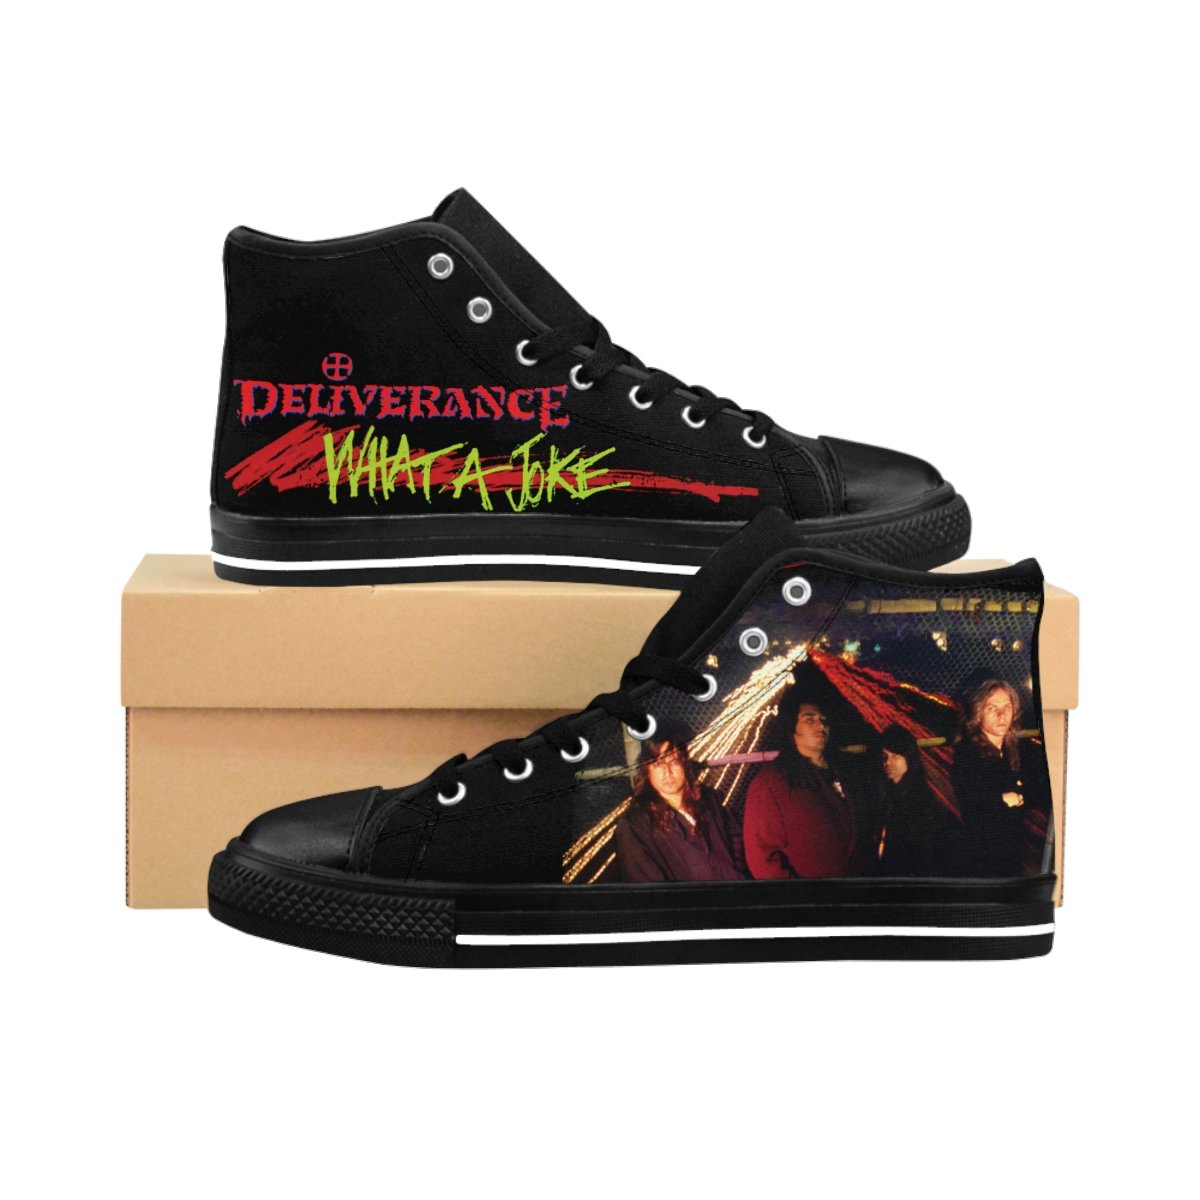 Deliverance – What a Joke Men’s High-top Sneakers